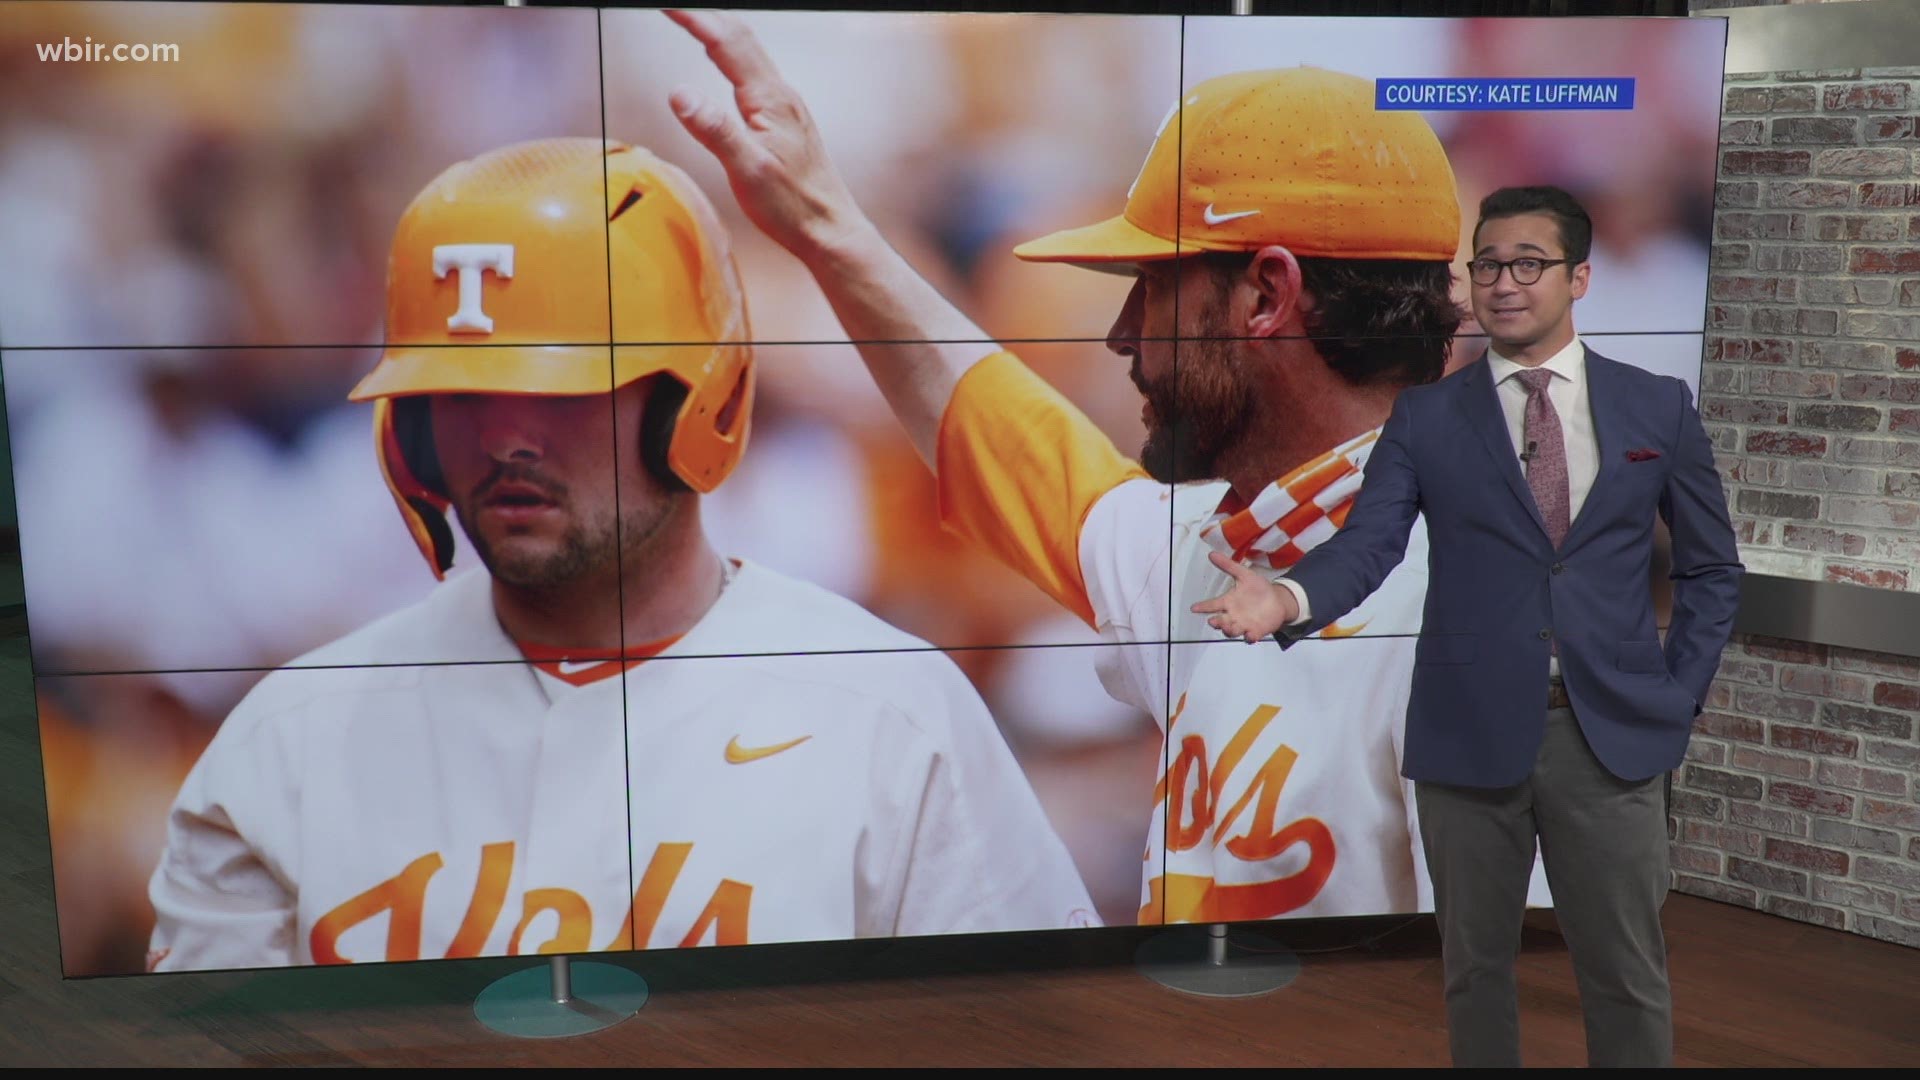 The SEC Baseball tournament starts this week, but before the home runs Tennessee racked up some honors from the conference.